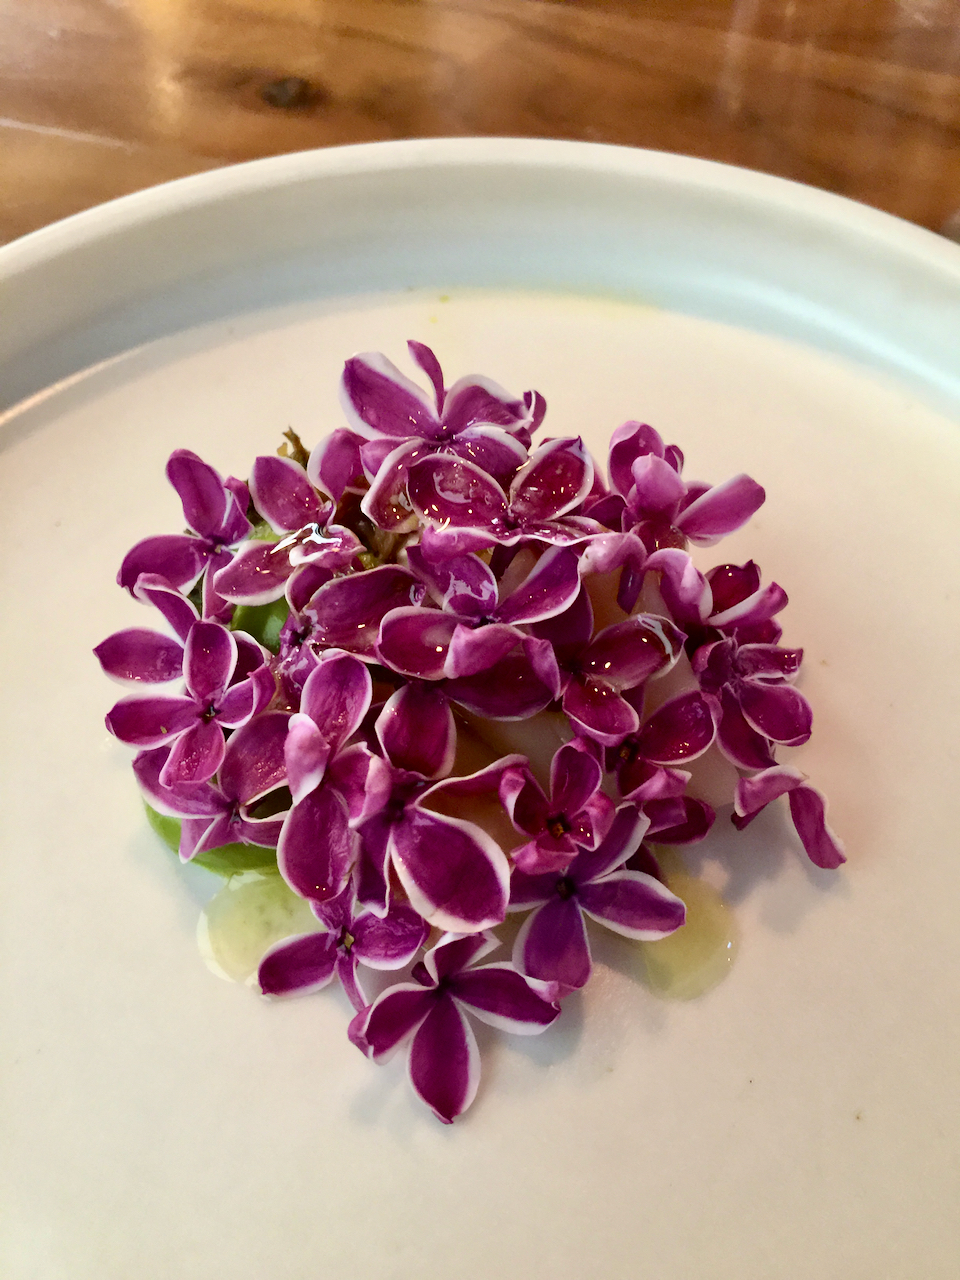 Lilacs were served as an appetizer at a fancy restaurant.